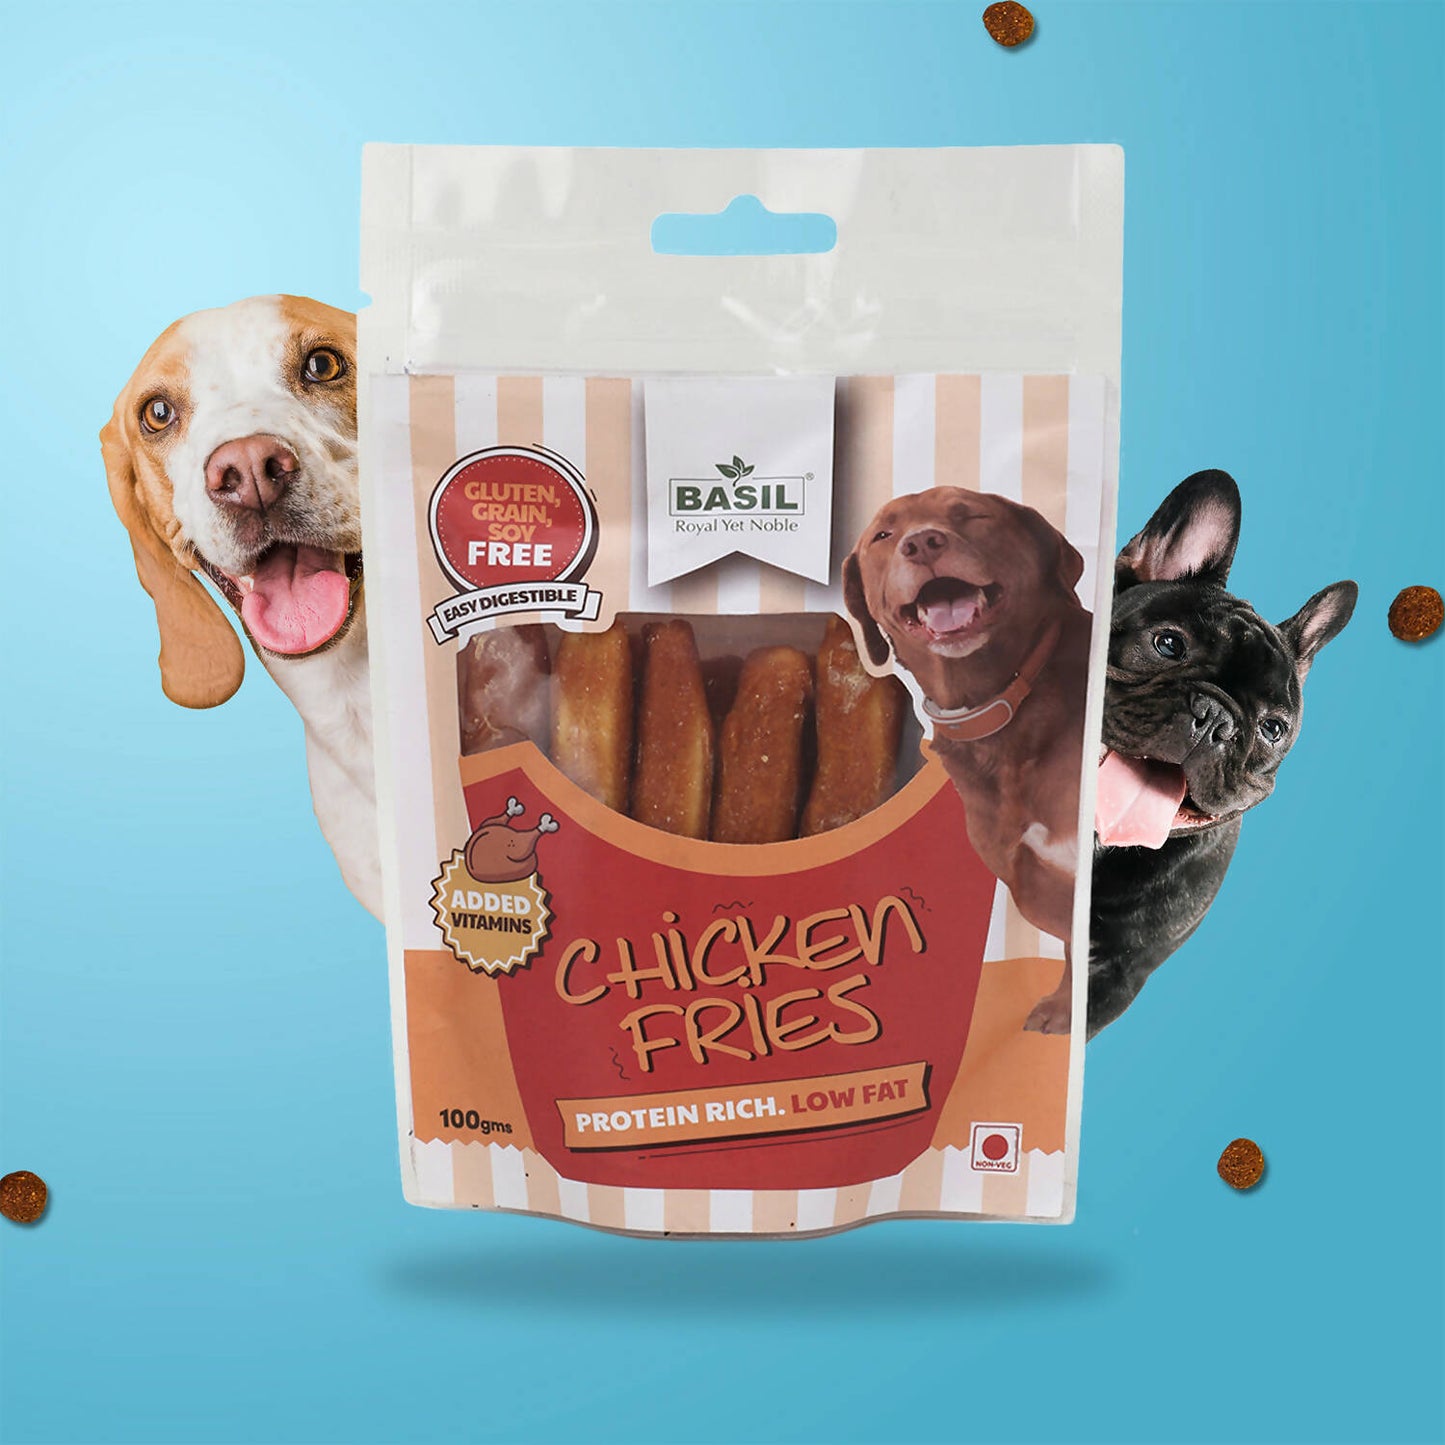 Basil - Chicken Fries Treat For Dogs